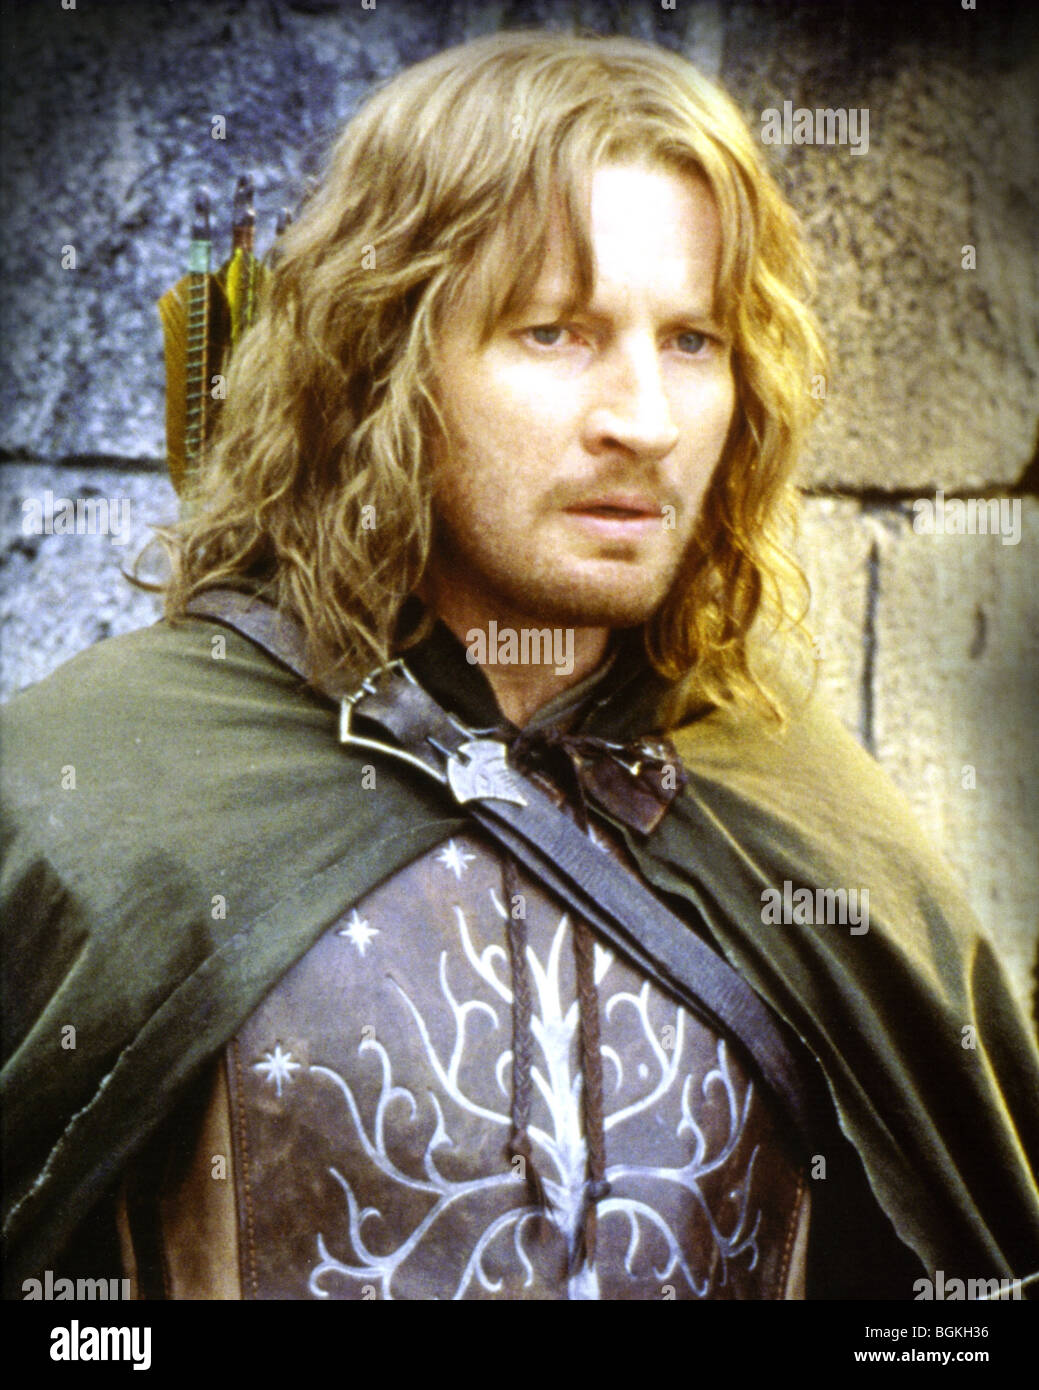 LORD OF THE RINGS: THE RETURN OF THE KING - 2003 Entertainment/New Line  film with David Wenham as Faramir Stock Photo - Alamy